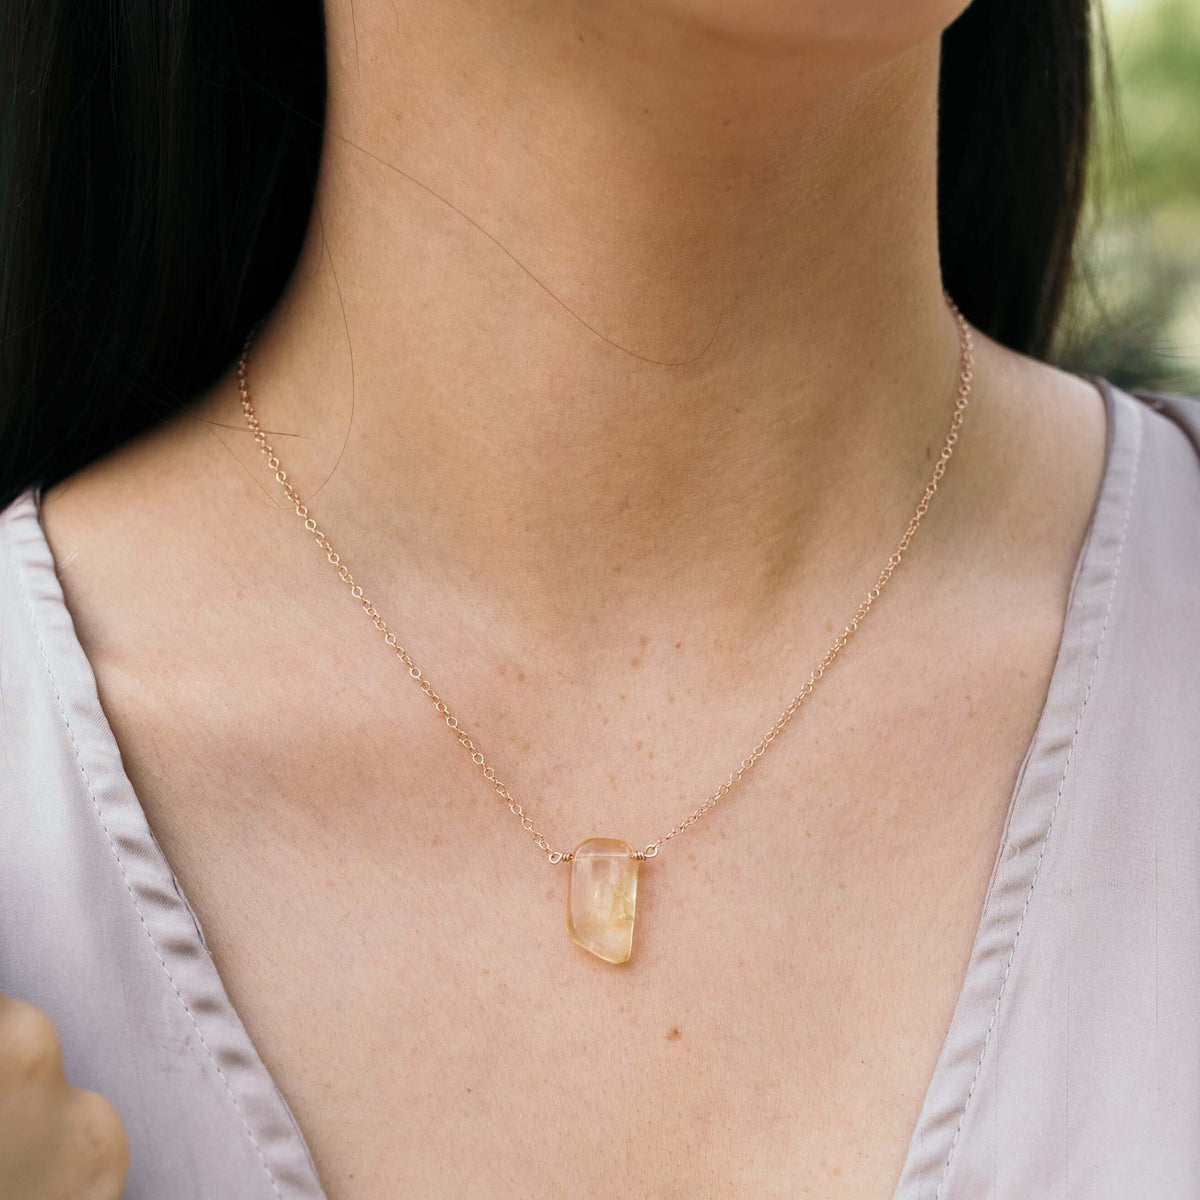 Small Smooth Slab Point Necklace - Citrine - 14K Rose Gold Fill - Luna Tide Handmade Jewellery